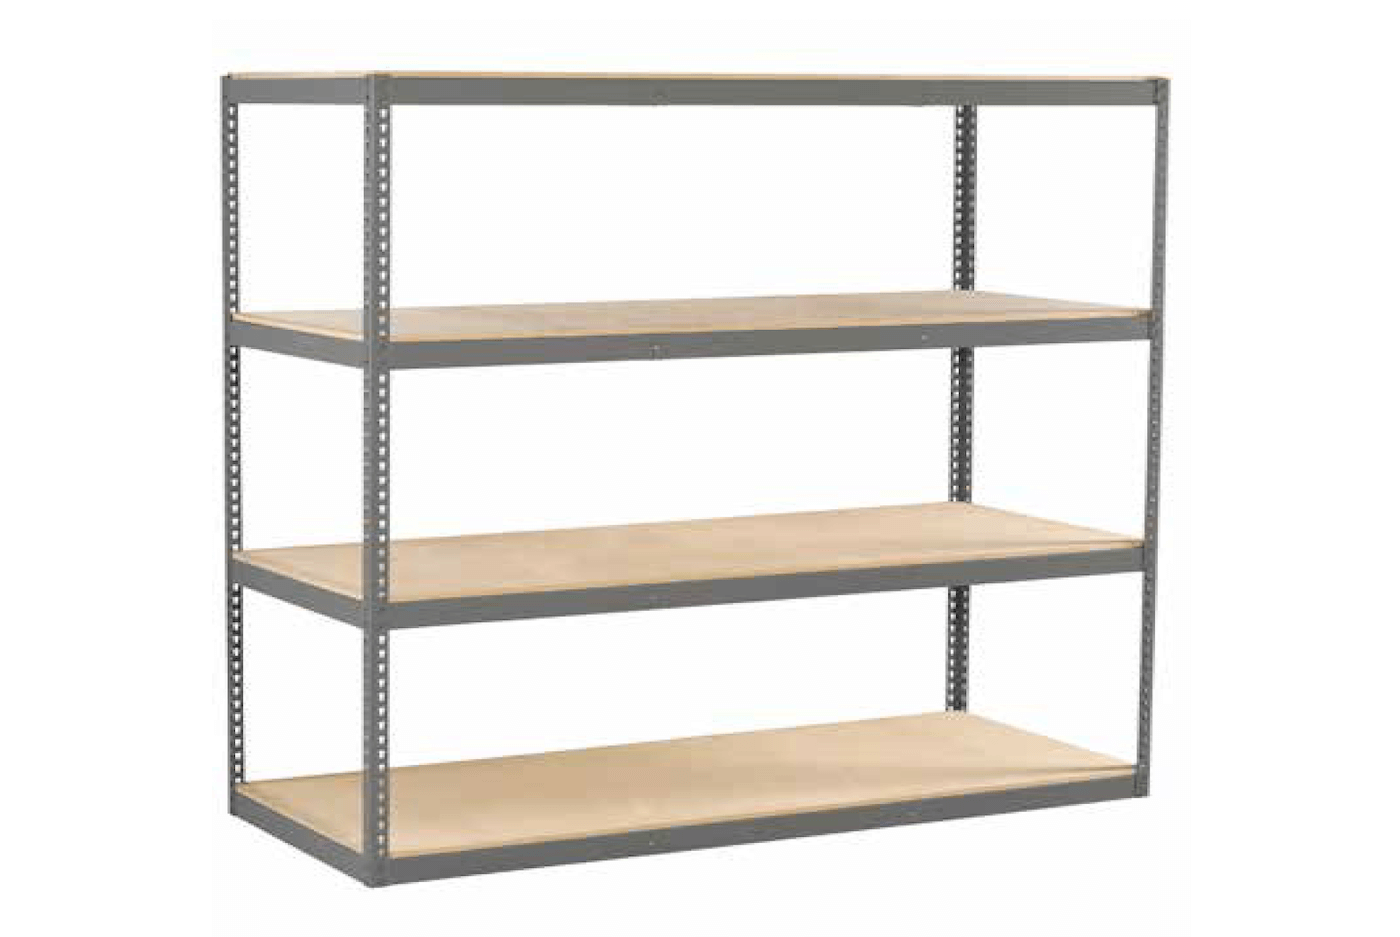 Wide-Span Shelving Installation Guide